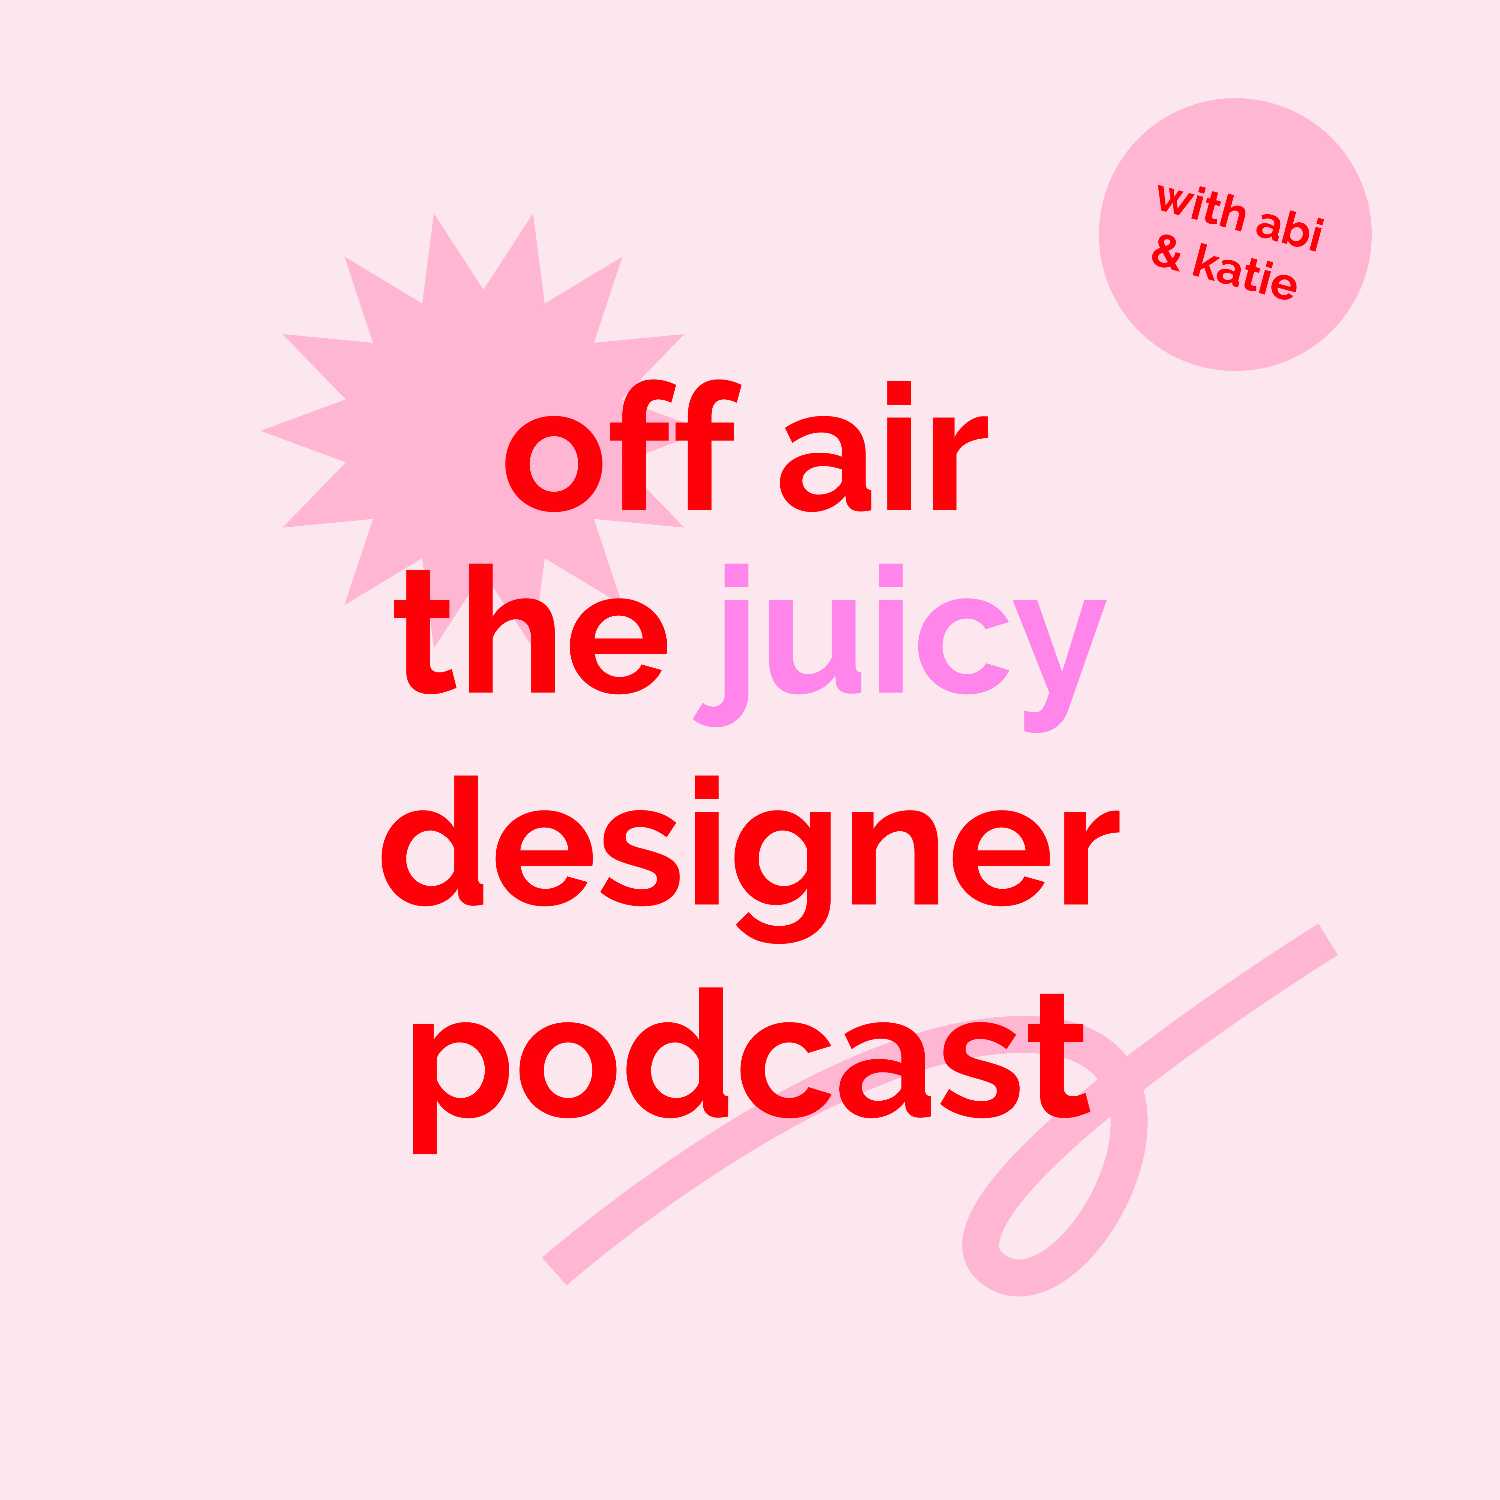 S1 E4 | Dishing the dirt: sharing your pet peeves with Brand and Bloom Designs